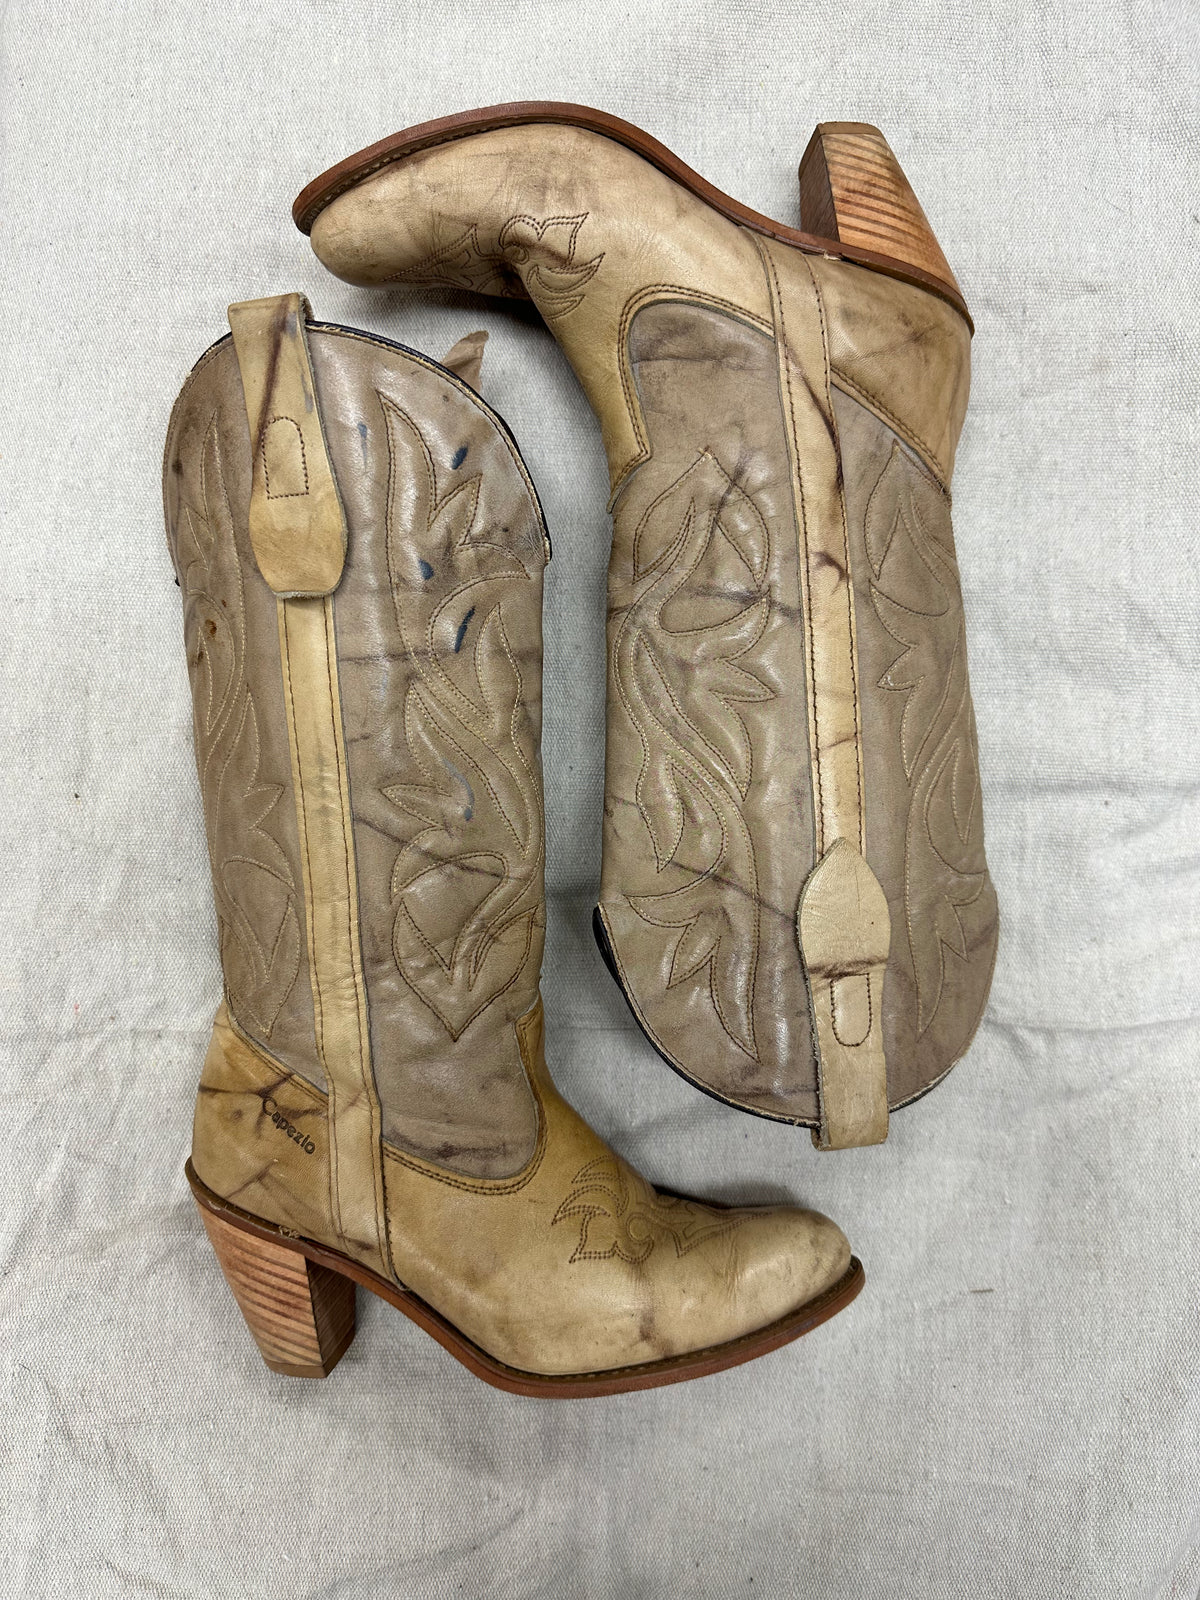 Two Toned Grey and Tan Stacked Heel Cowboy Boots